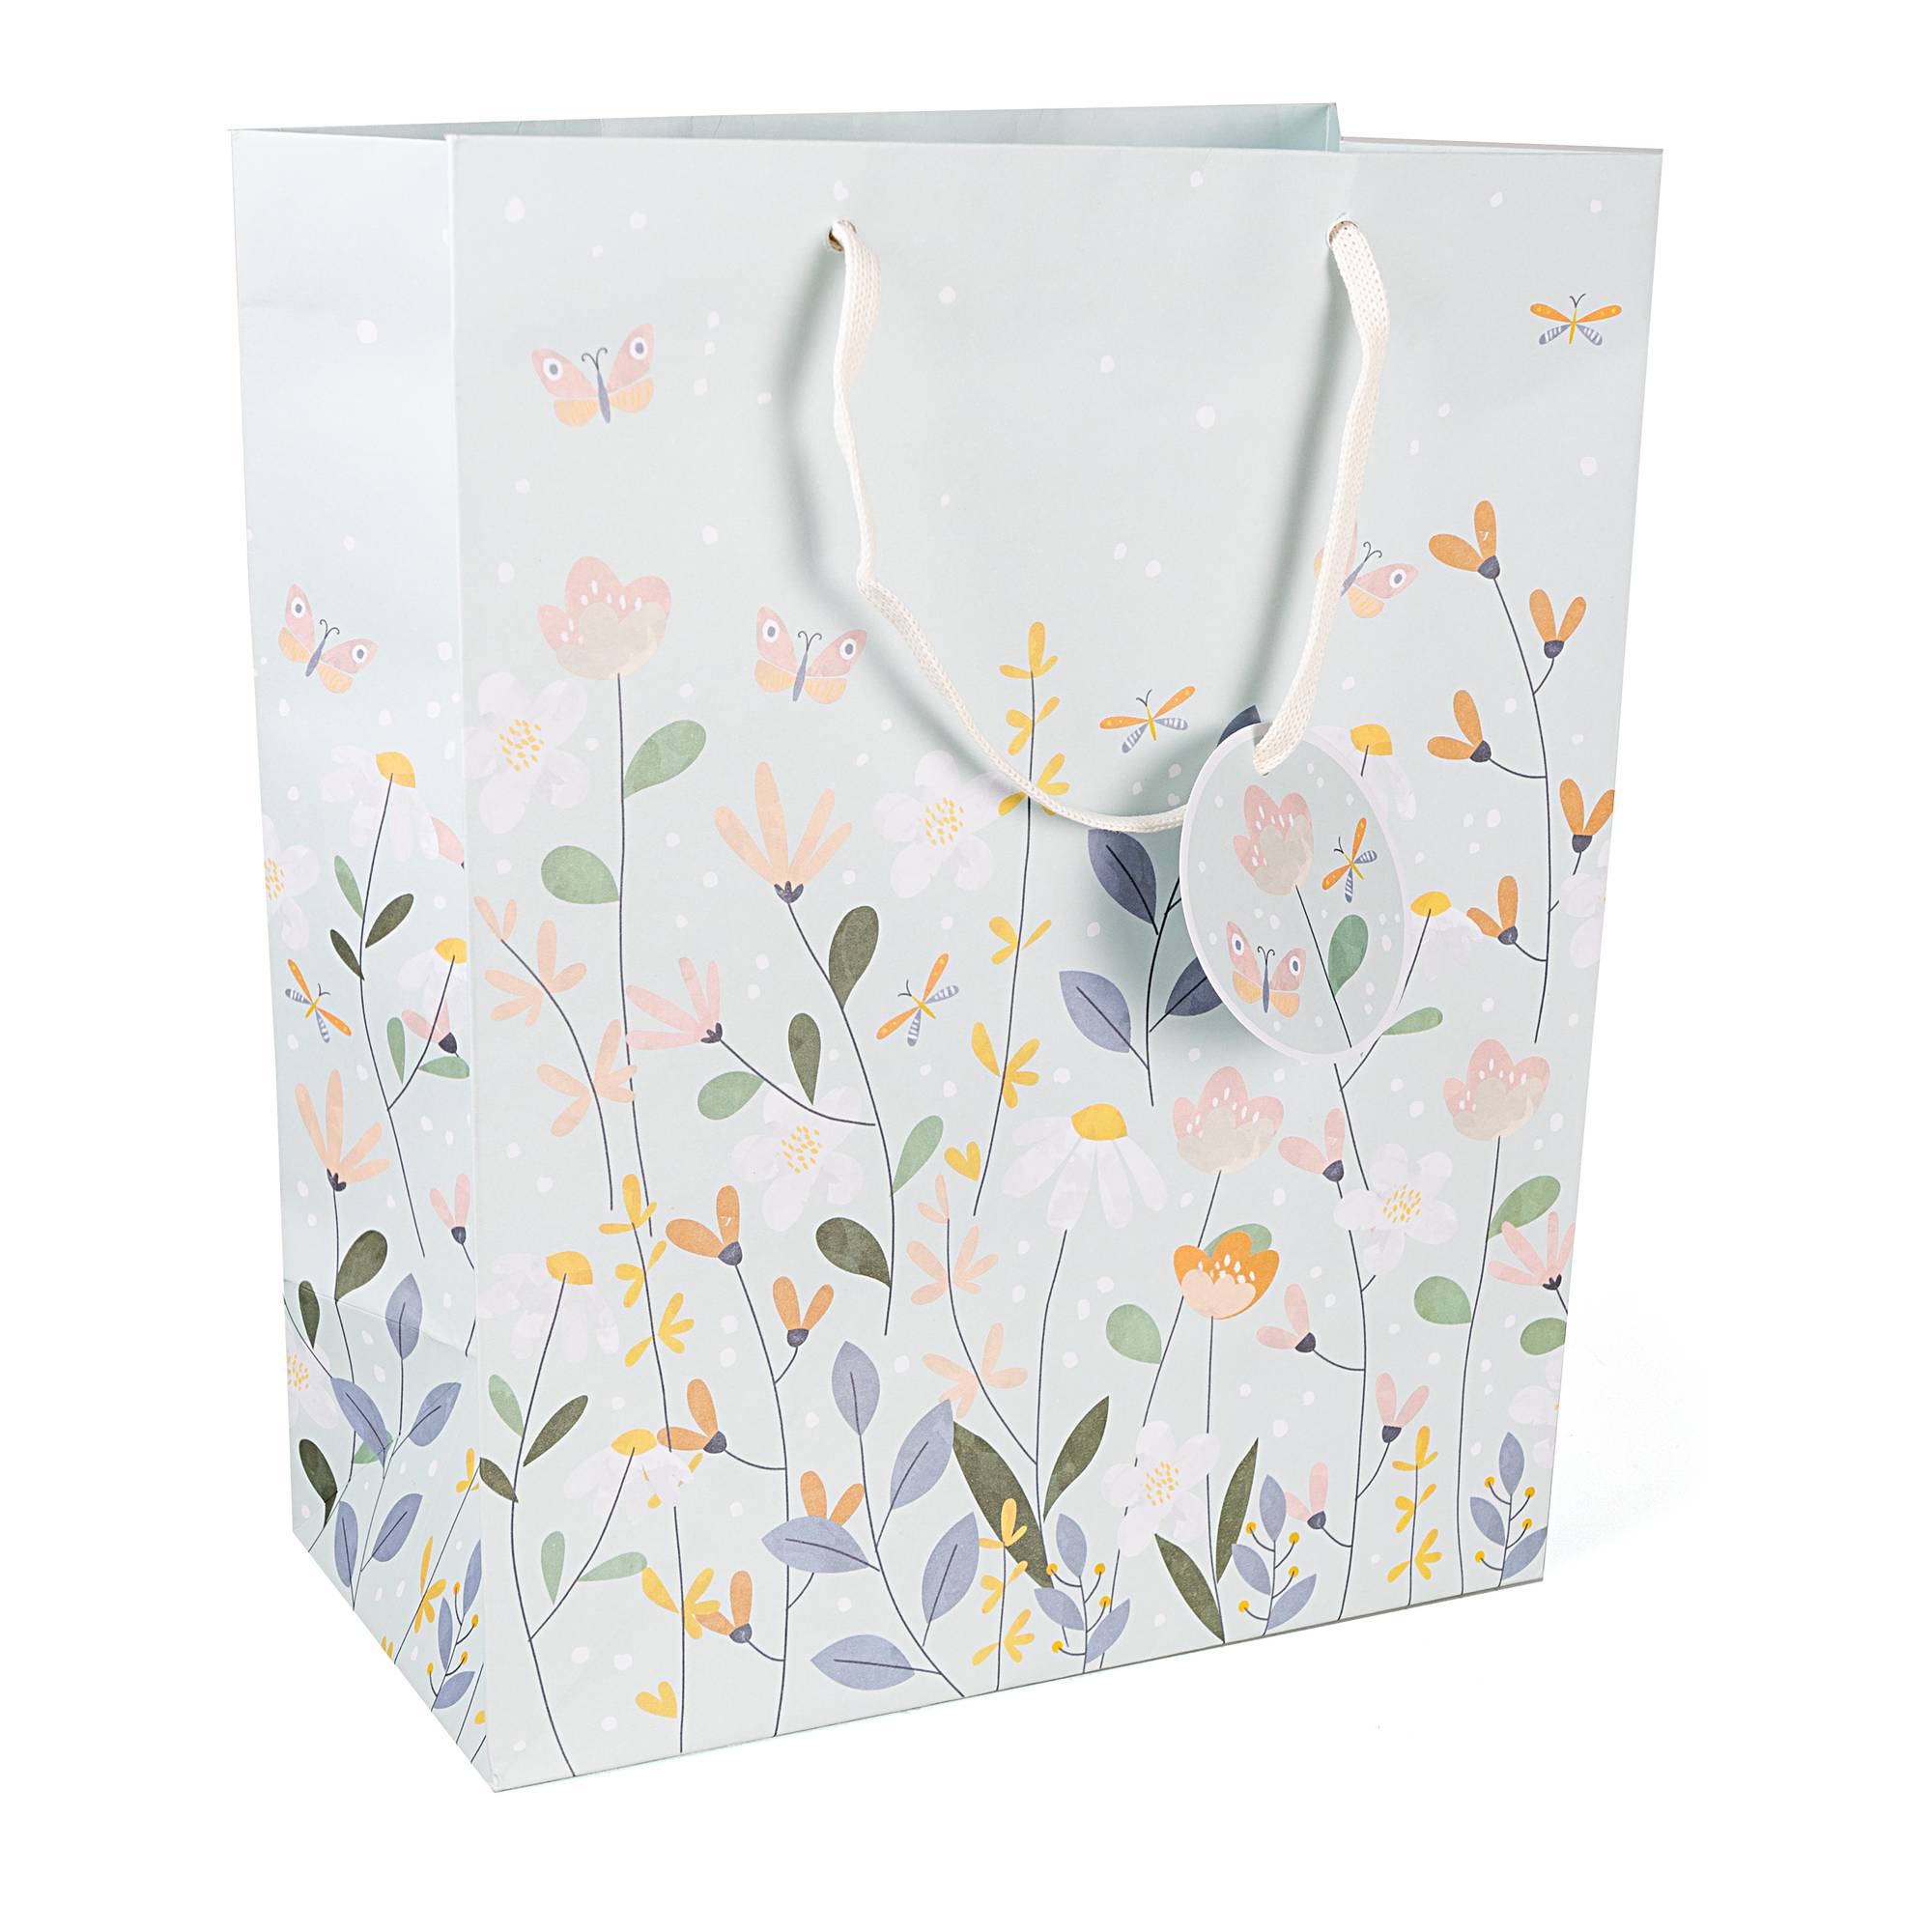 665834 1000 1 delicate flowers gift bag large